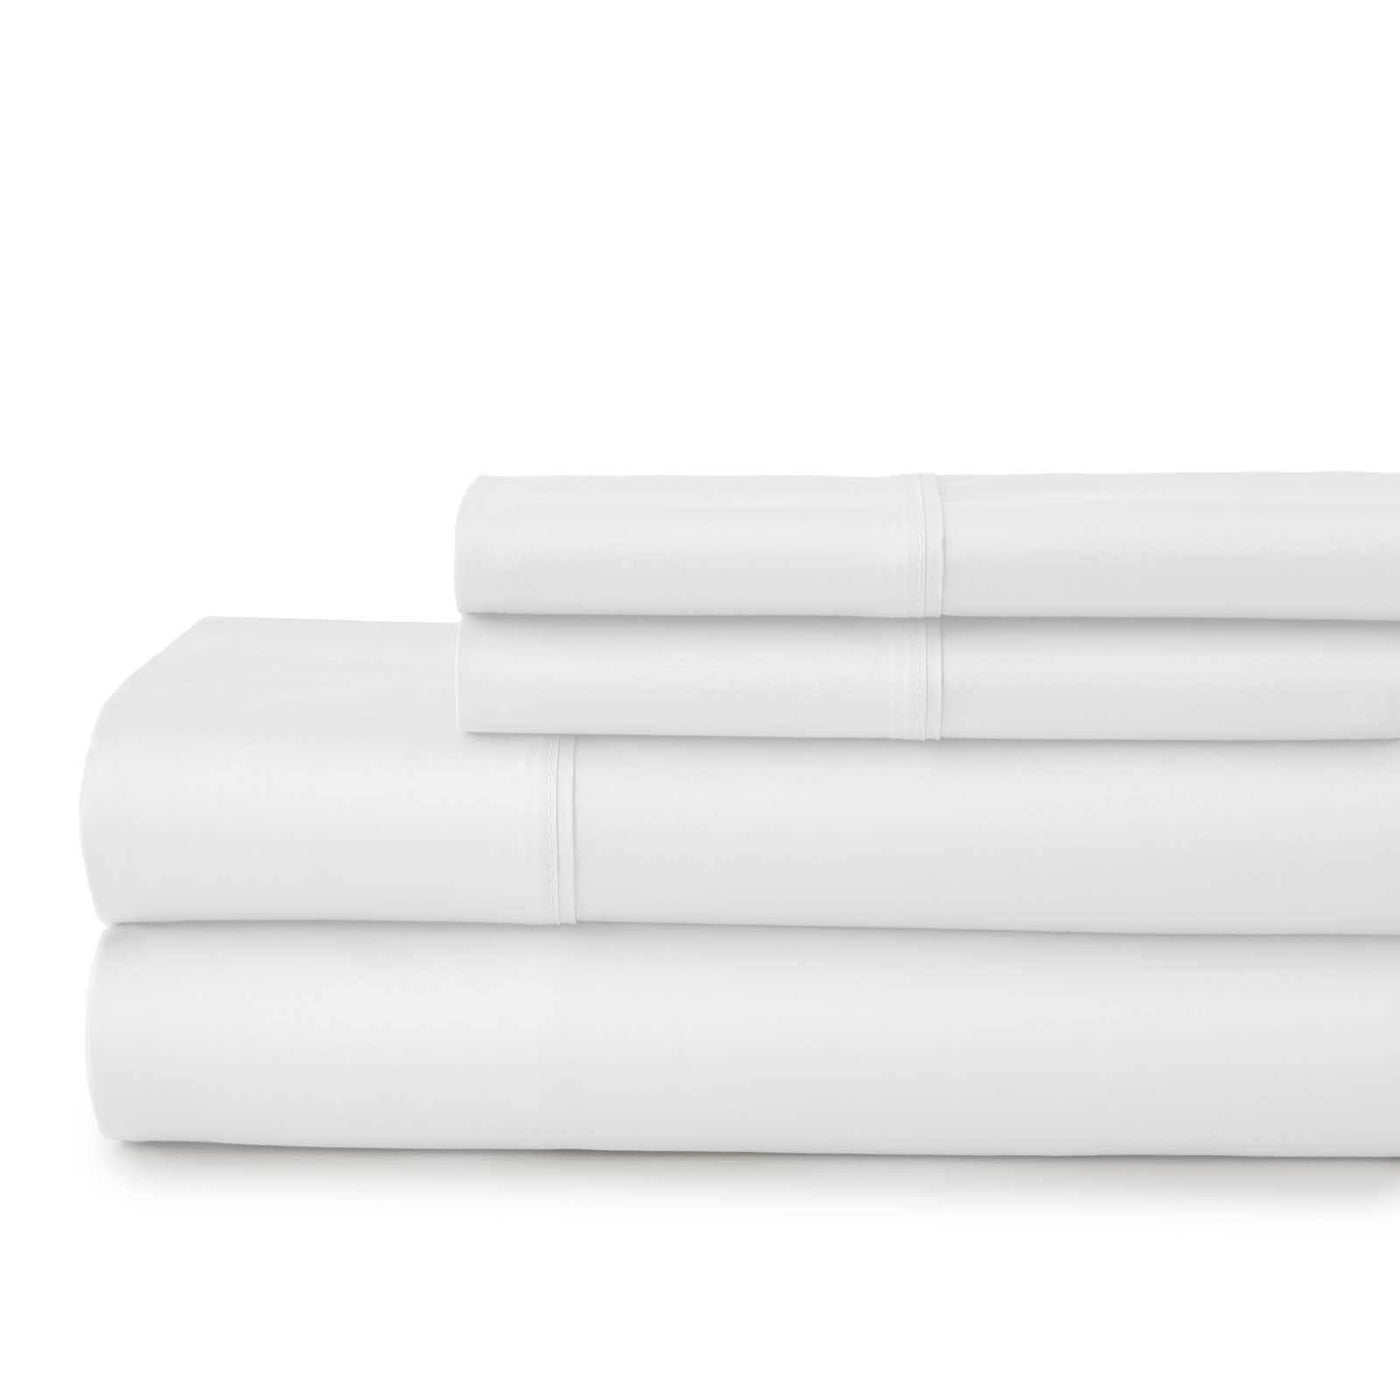 Sweetbrier 100% Cotton Sateen Extra Deep Pocket Sheets Set Luxury Collection in Bright White#color_sateen-white